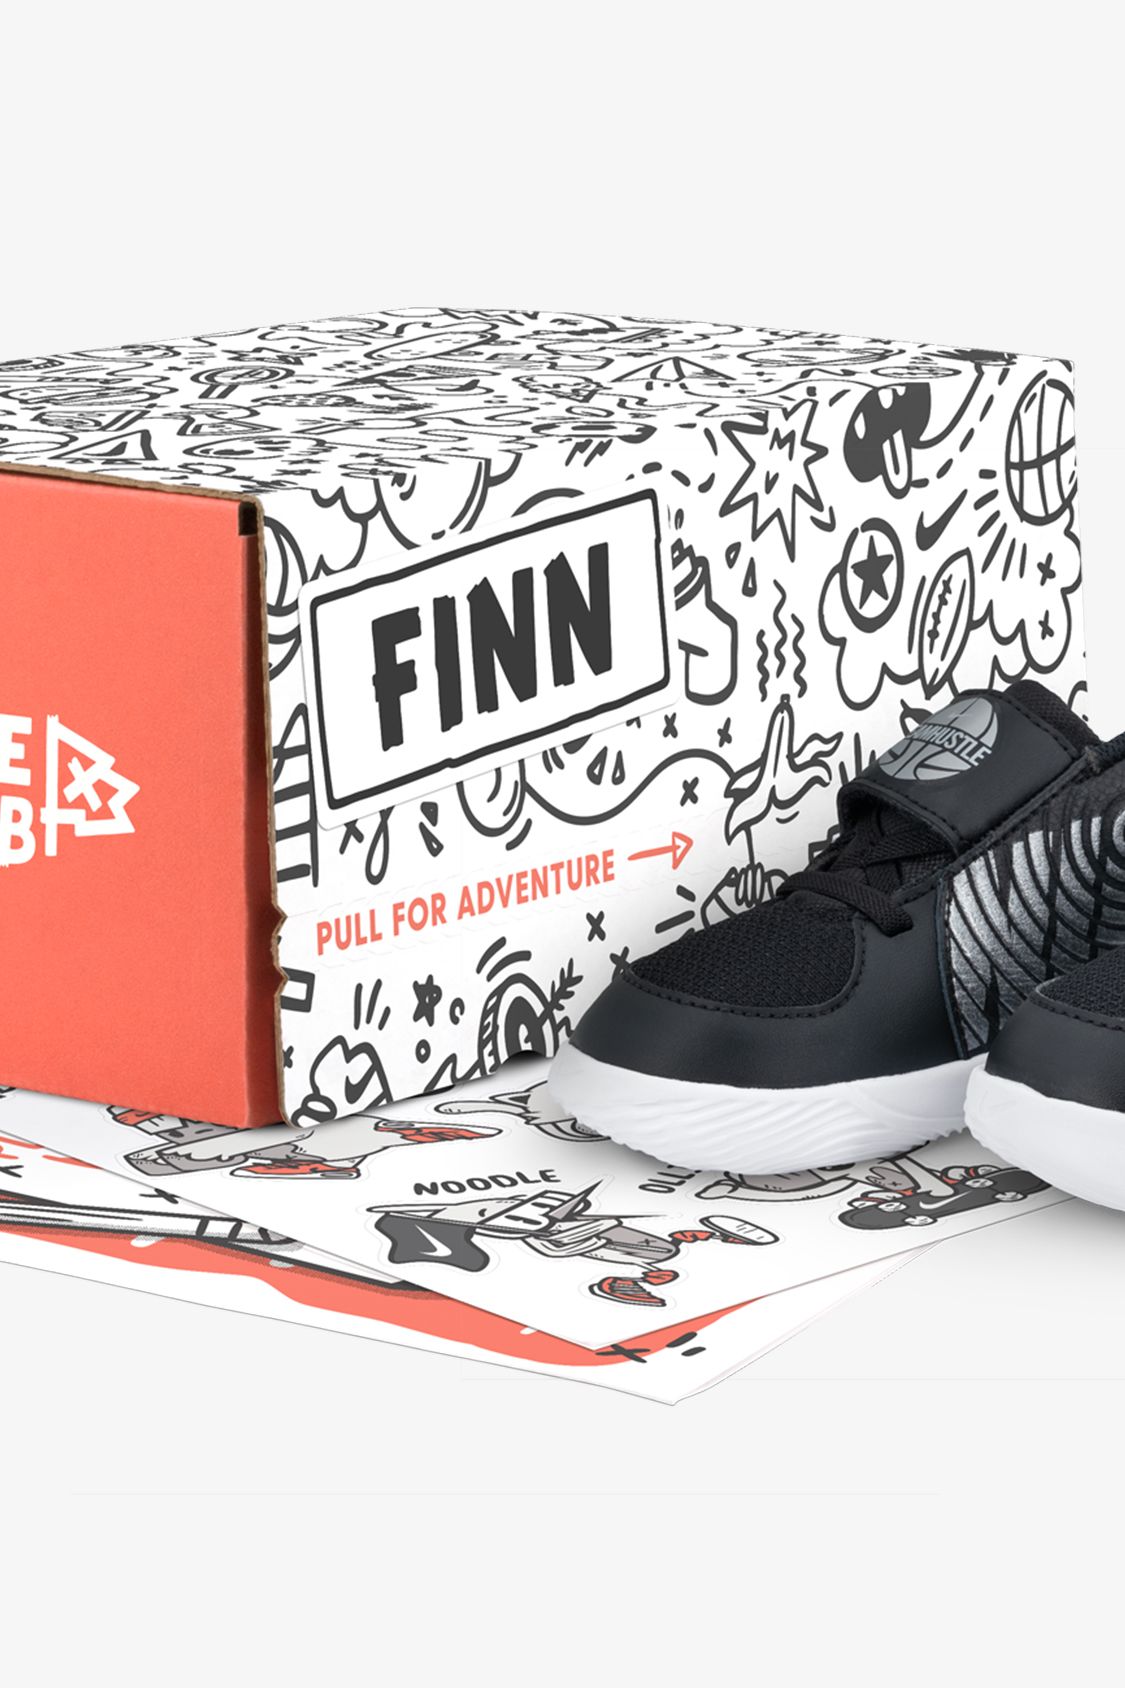 sneaker subscription service for kids | Business